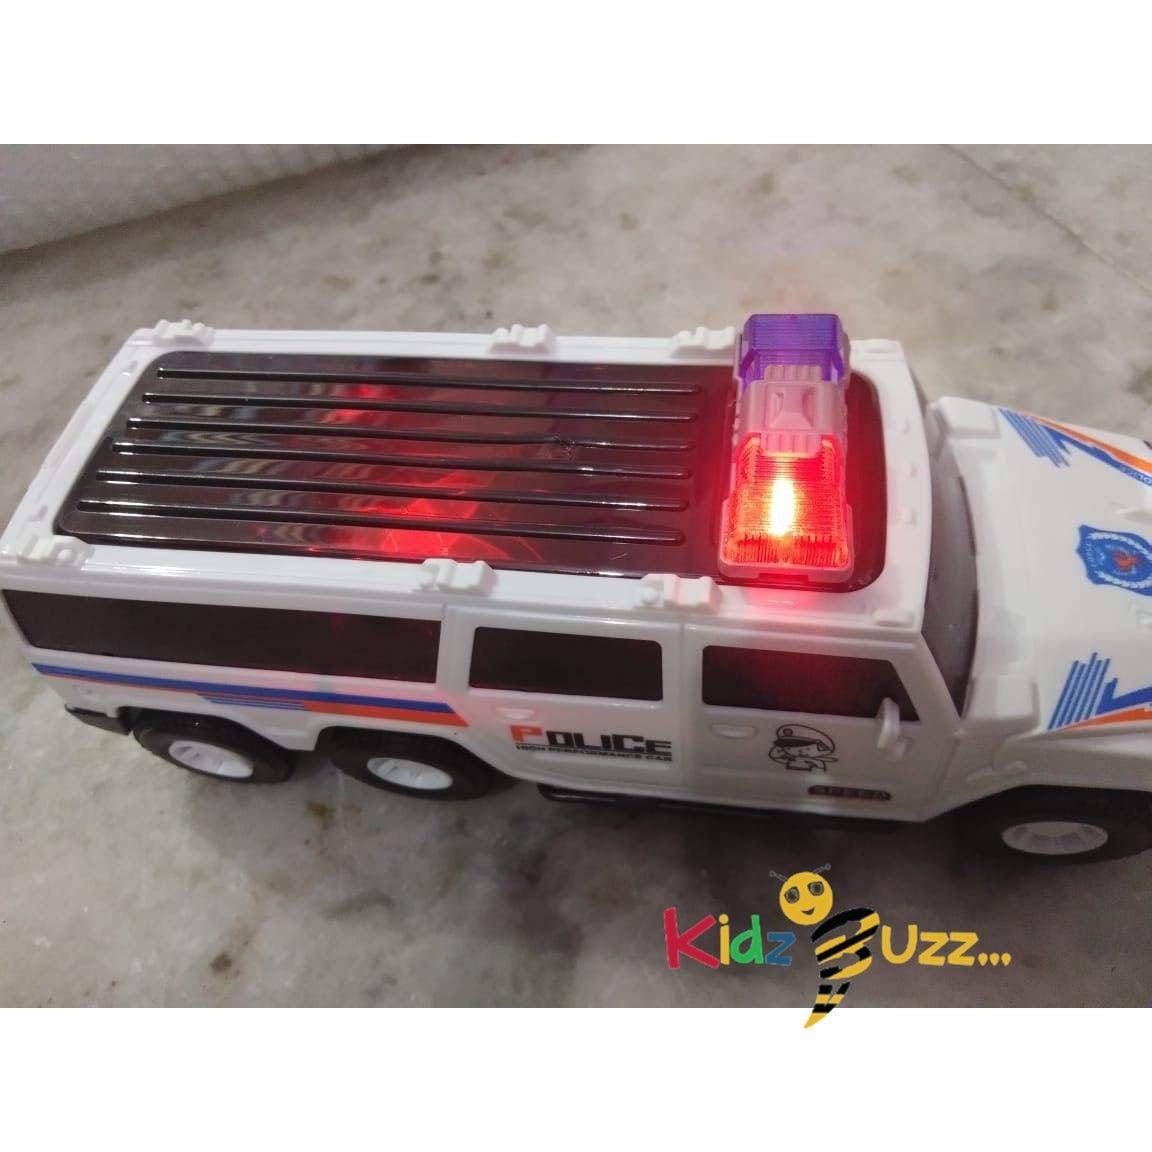 Police Car Toy 360 Degree Rotating